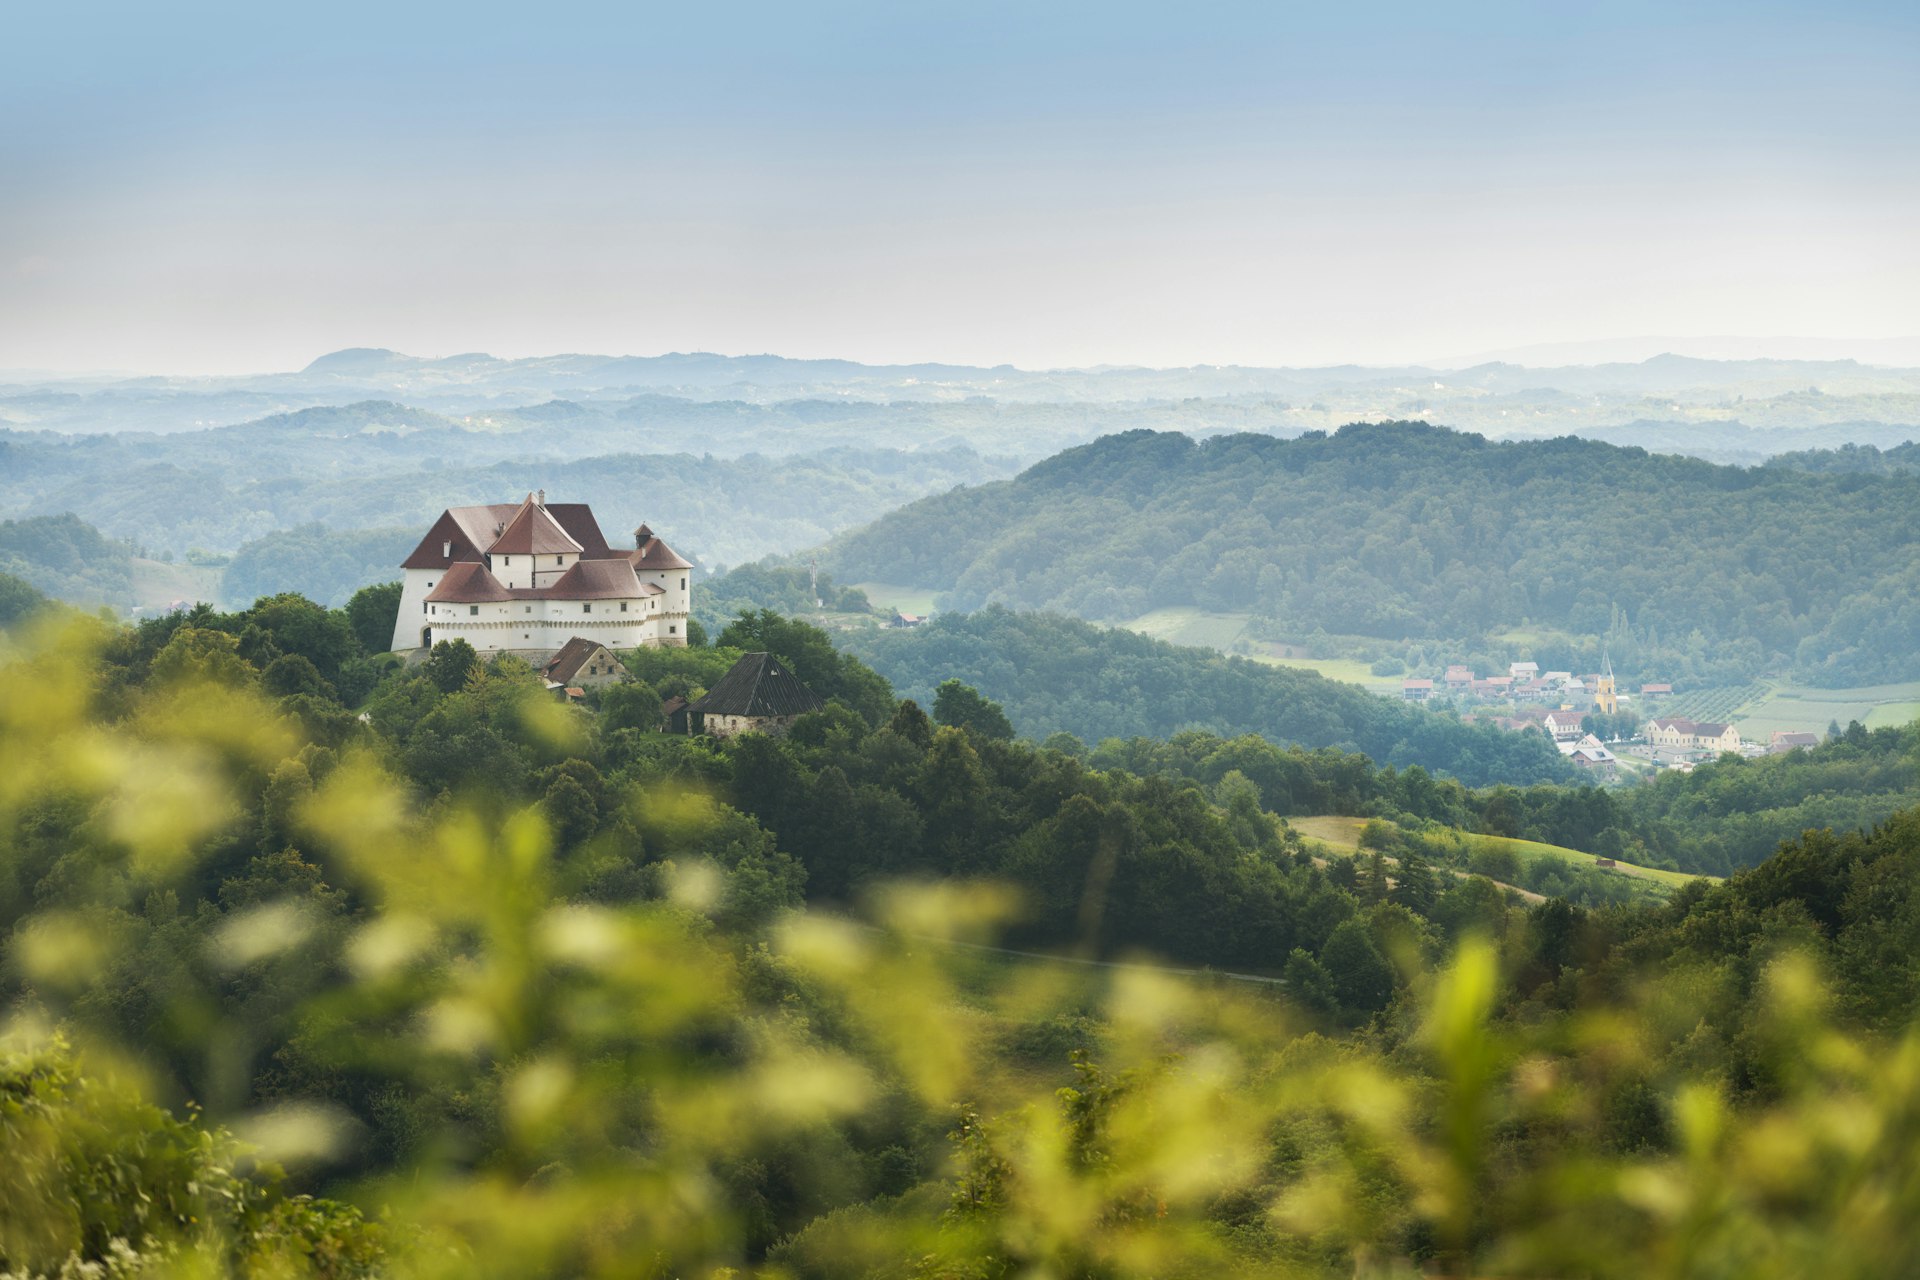 The Veliki Tabor 16th-century castle and surrounding countryside in Zagorje, Croatia